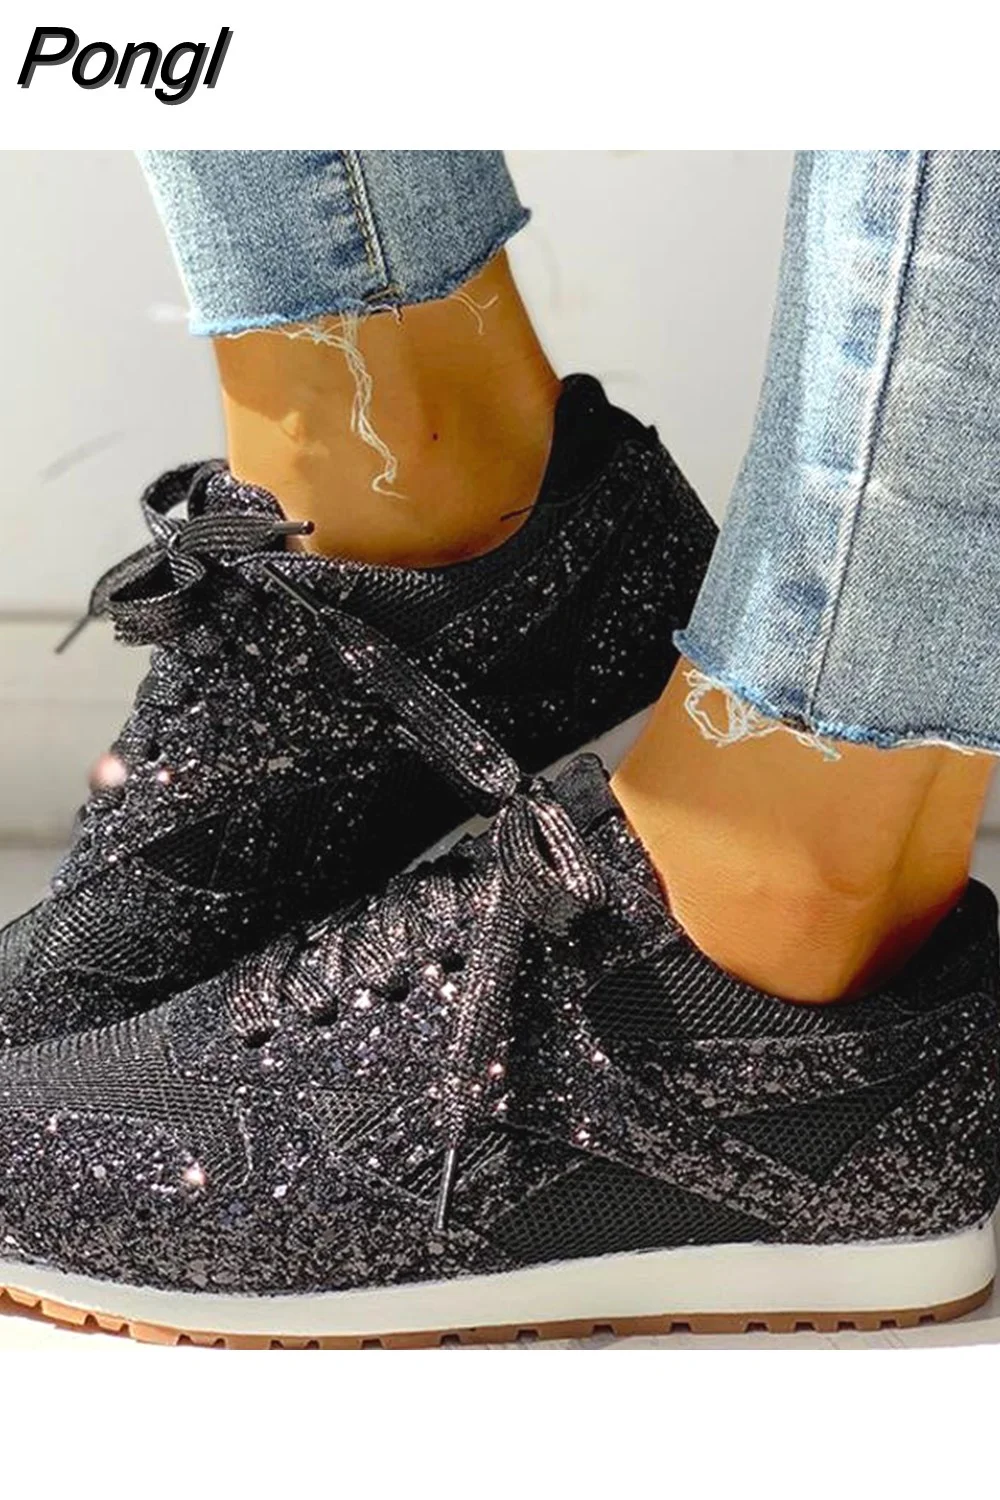 Pongl Flat Glitter Sneakers Casual Female Mesh Lace Up Bling Platform Comfortable Plus Size Vulcanized Shoes 2023 Soft Knitting 405-0